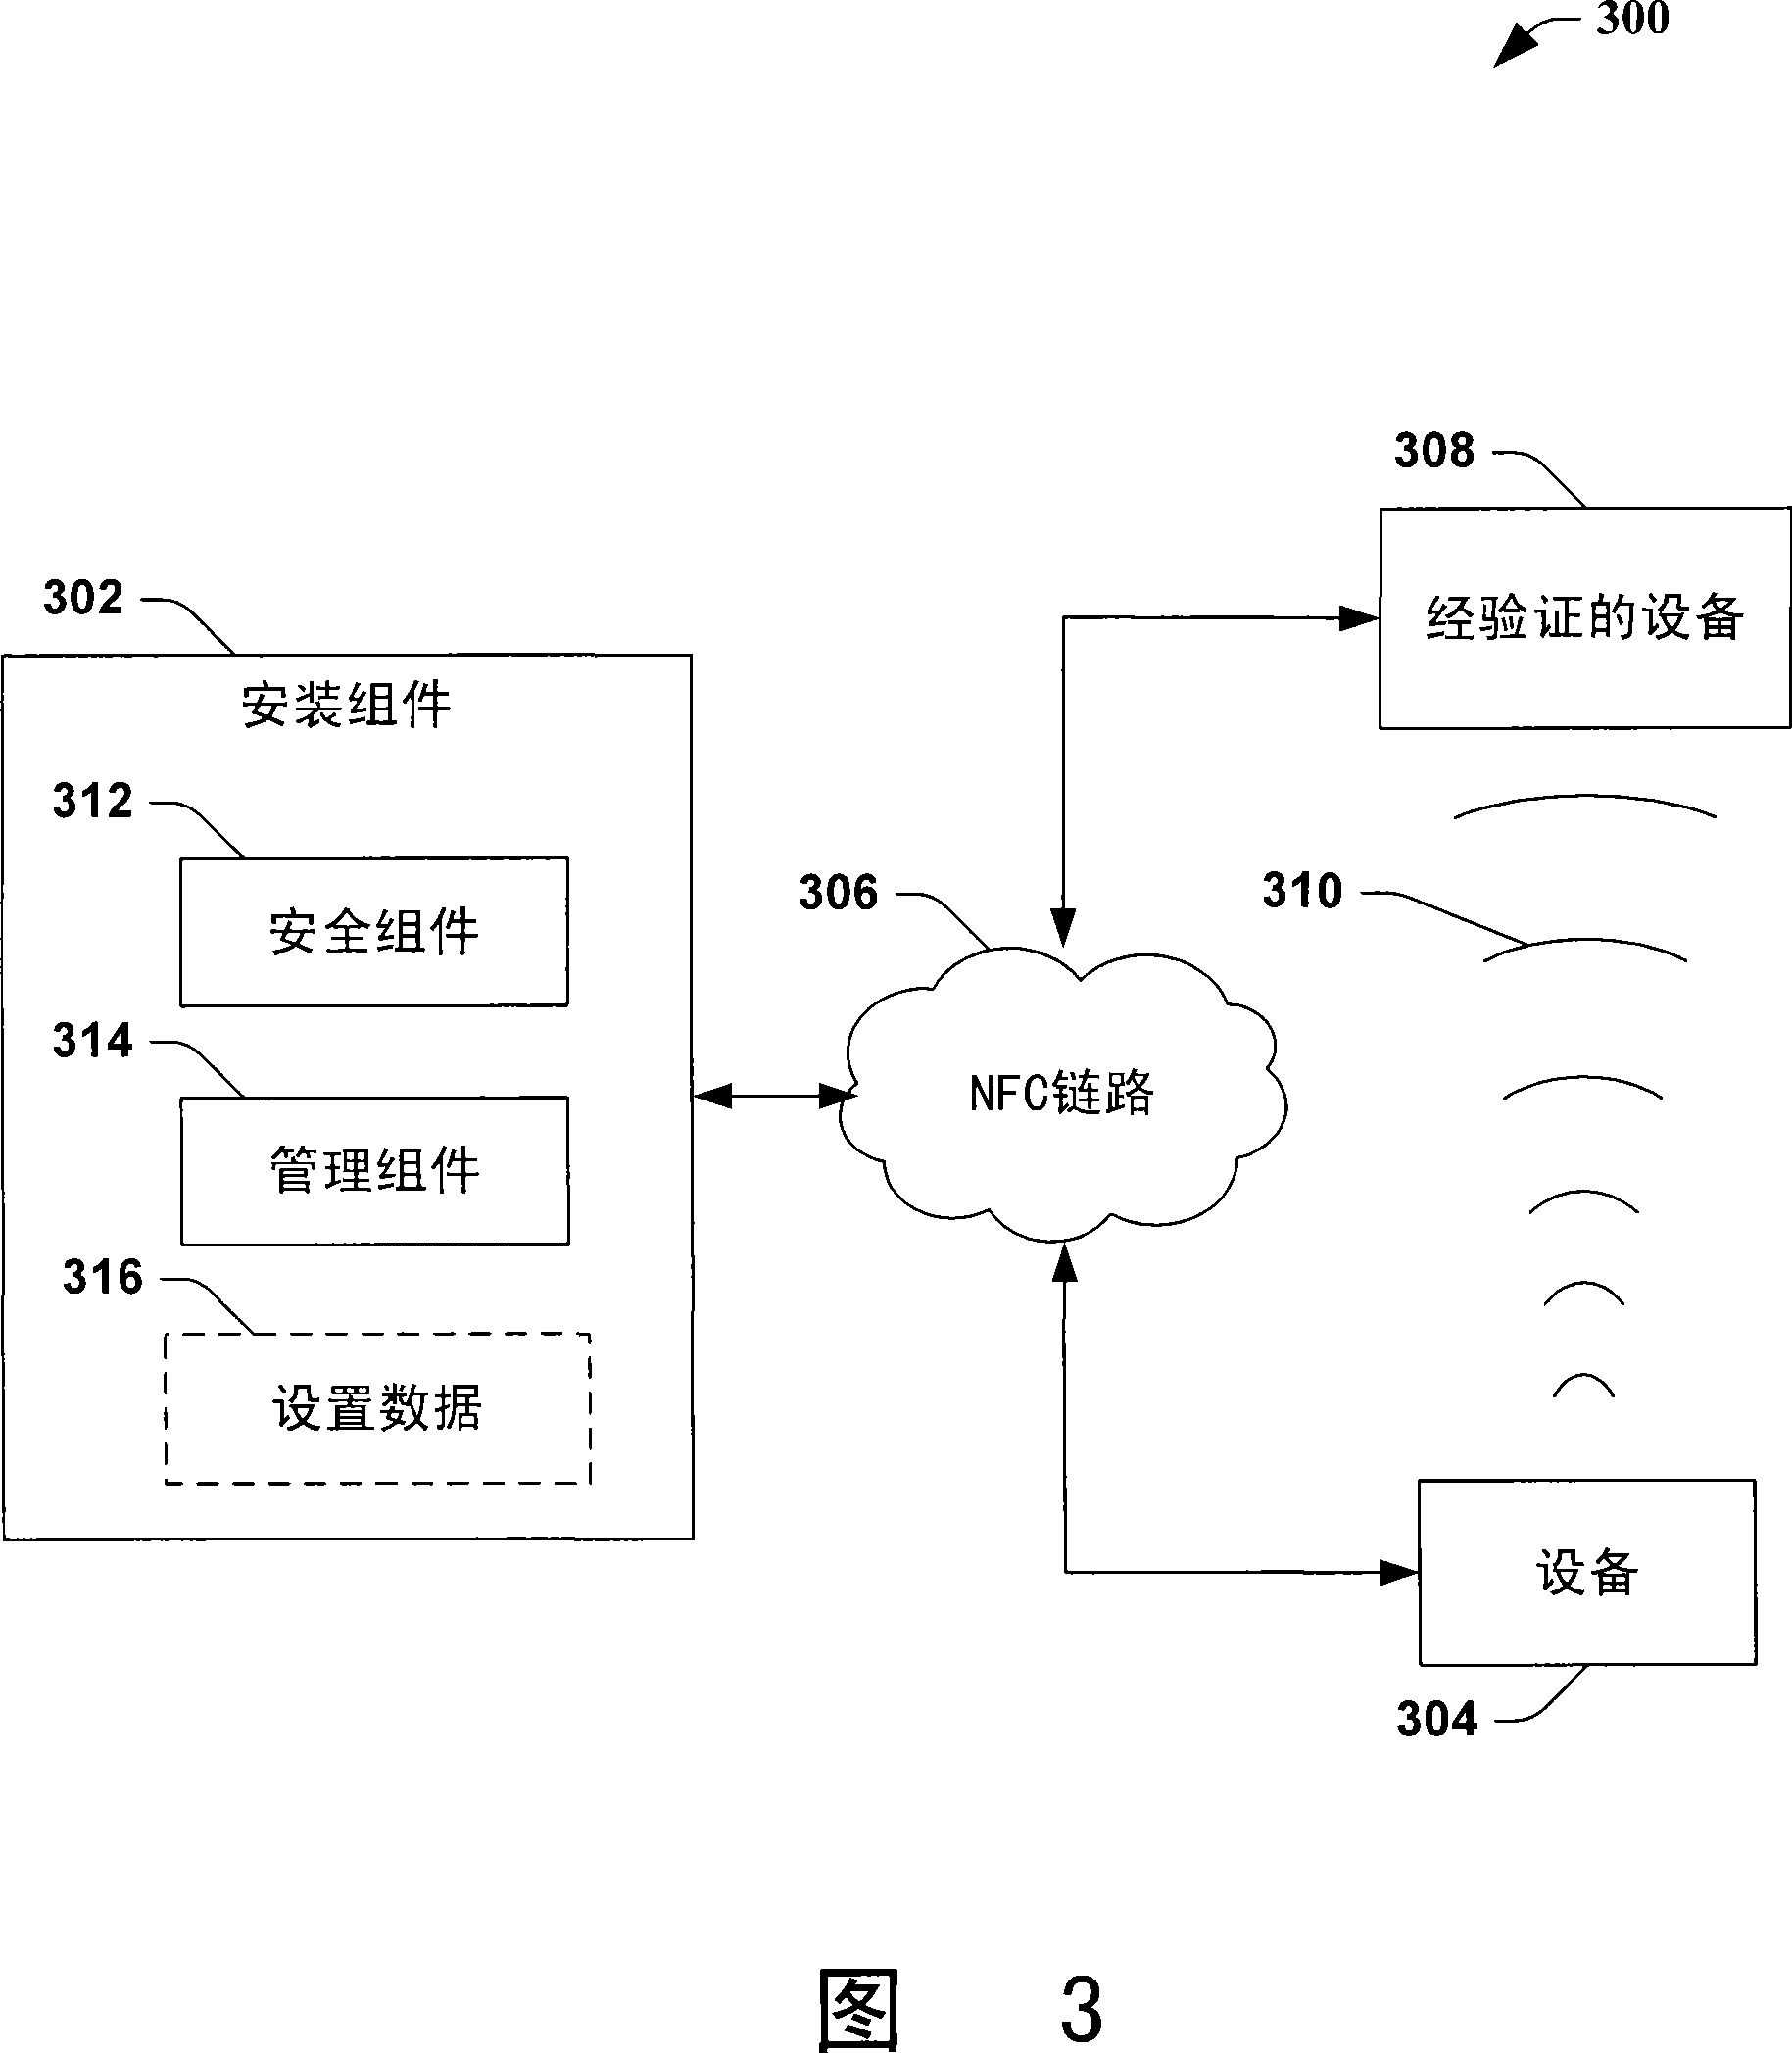 Provisioning of wireless connectivity for devices using nfc